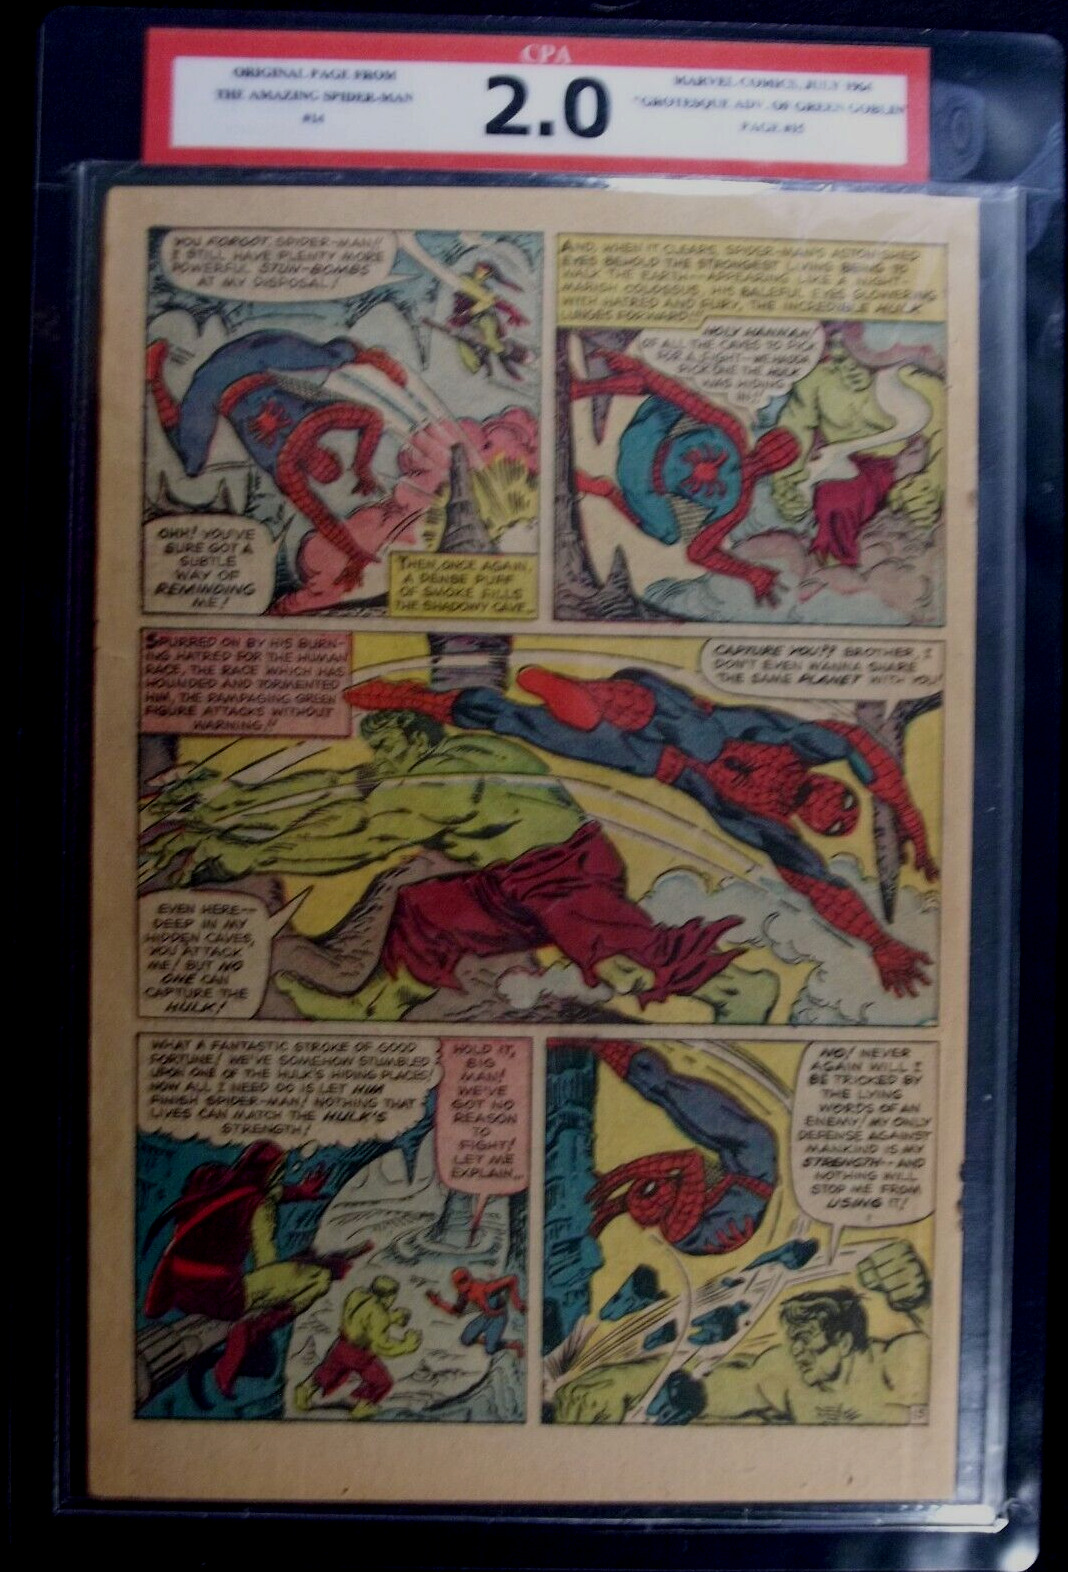 Amazing Spider-man #14 CPA 2.0 SINGLE PAGE #15 1st app. The Green Goblin